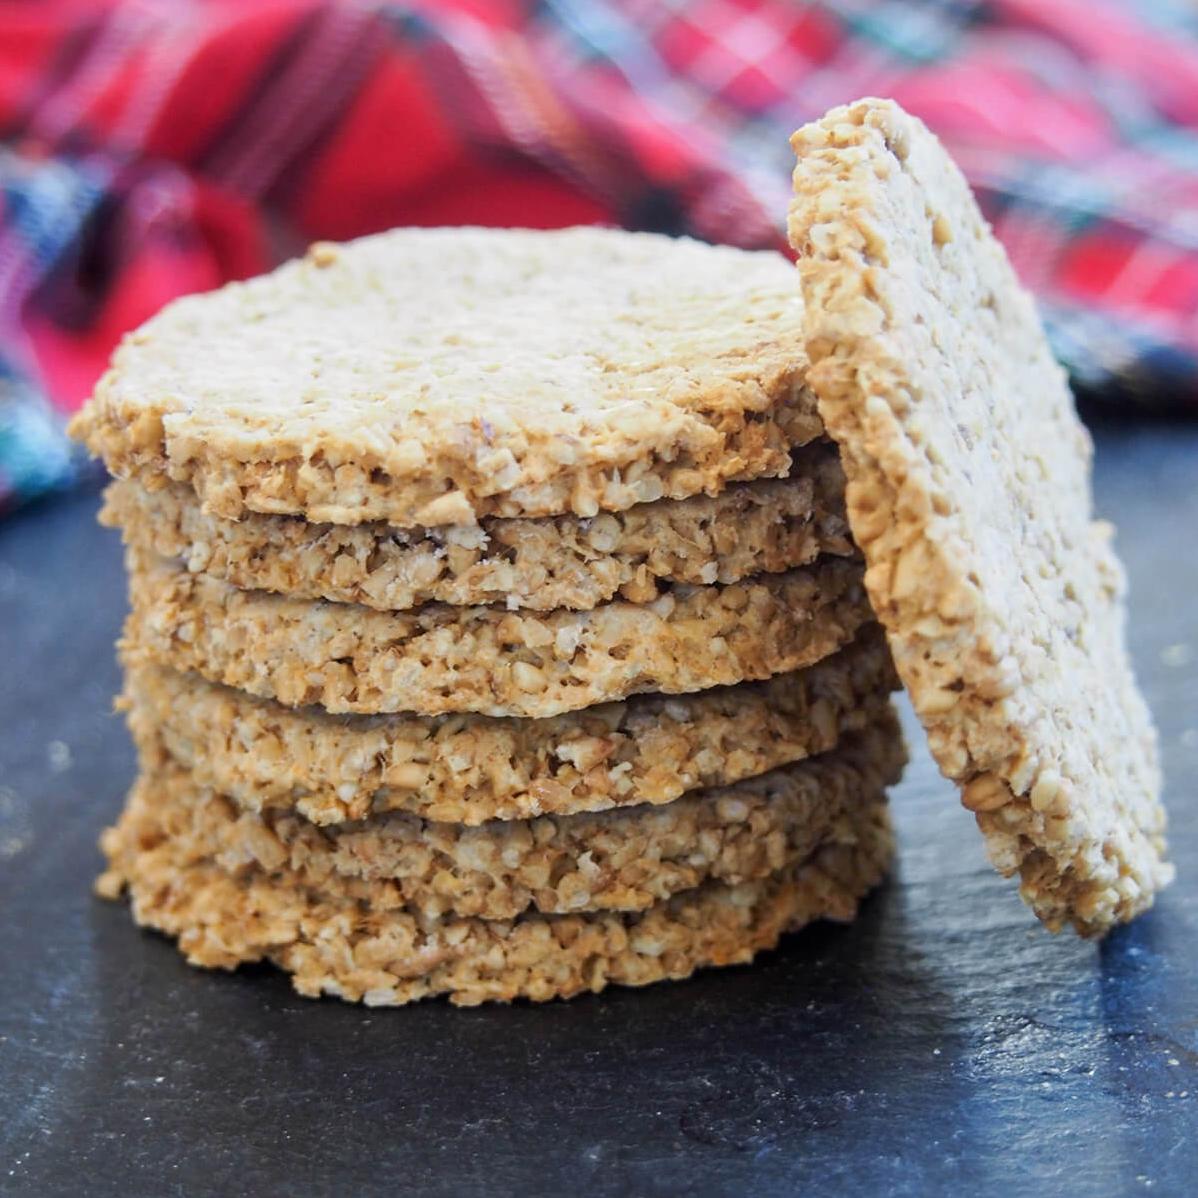  The combination of rolled oats, flour, and baking soda creates a perfect balance of chewy and crunchy textures.